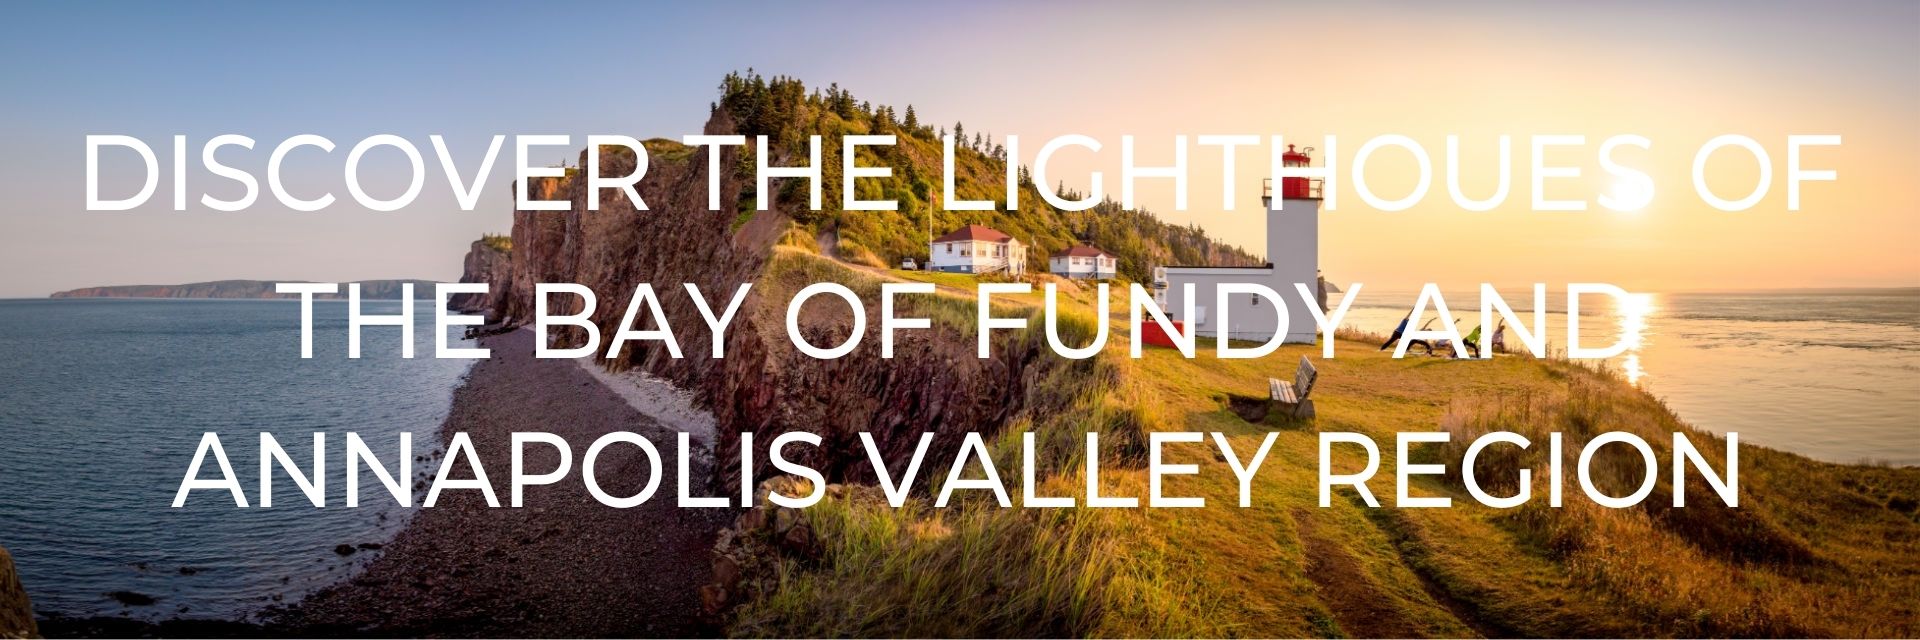 Discover the Lighthoues of the Bay of Fundy and Annapolis Valley Region Desktop Header